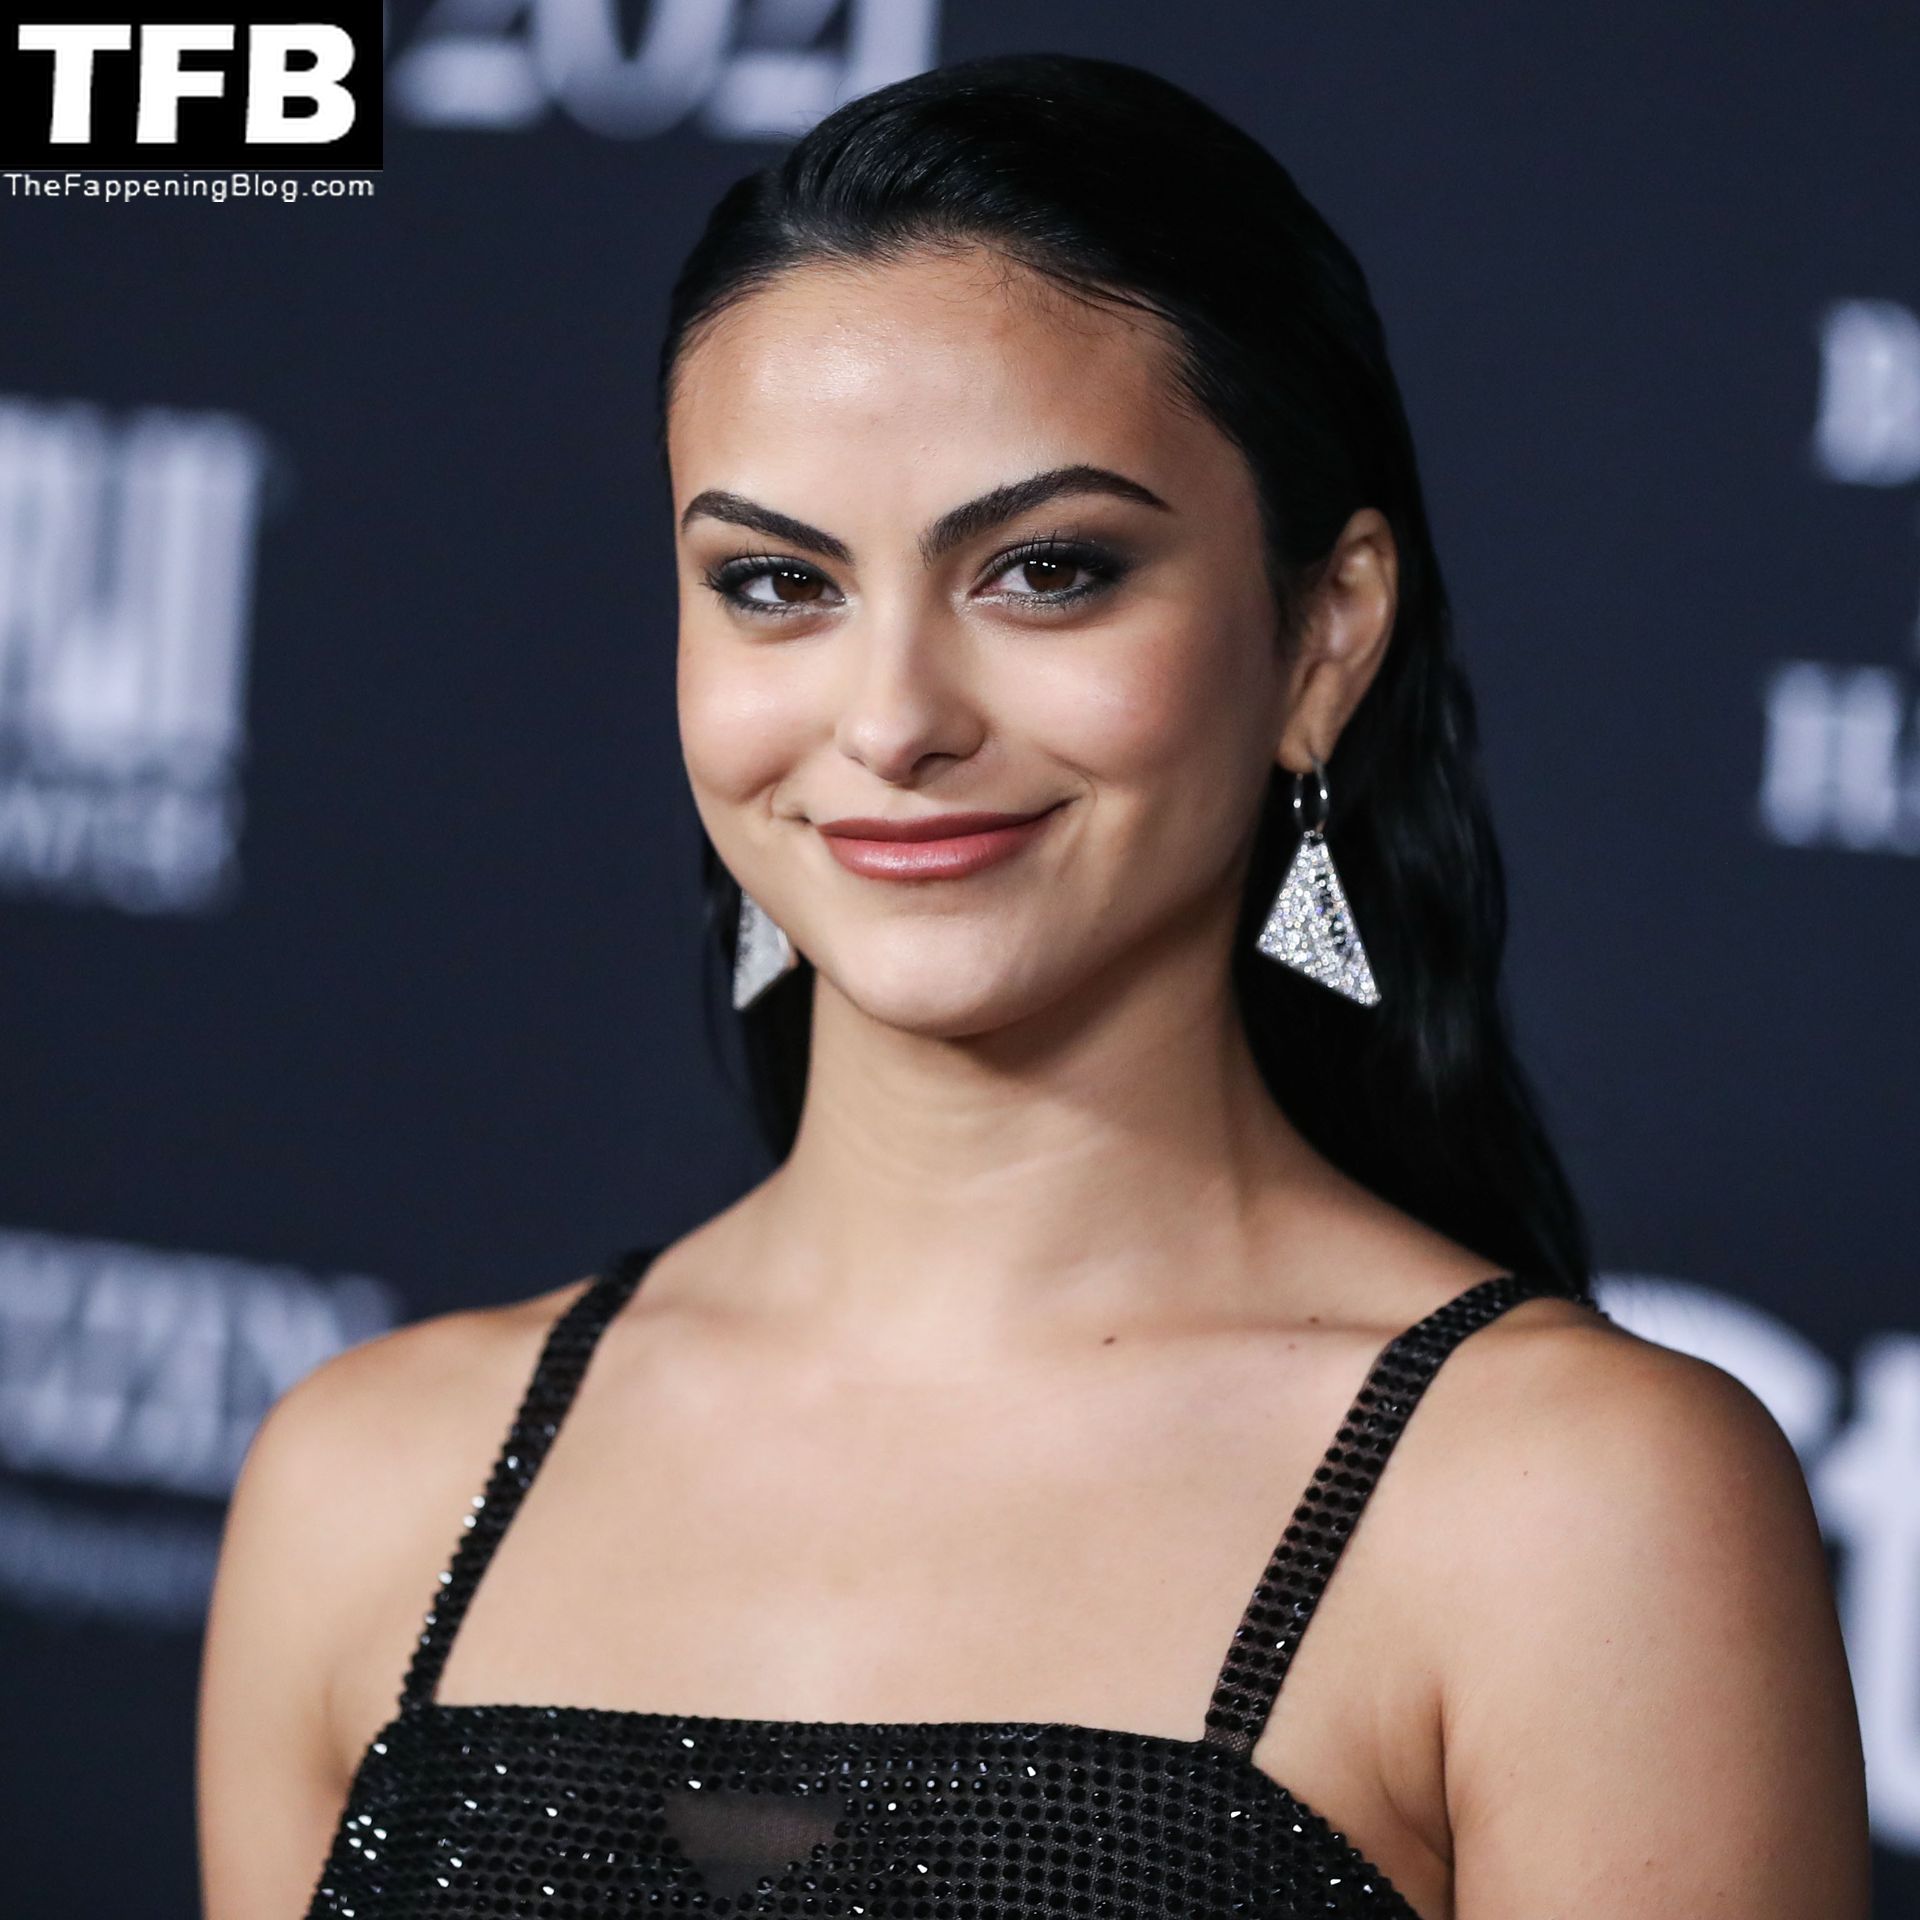 Camila-Mendes-See-Through-Tits-The-Fappening-Blog-5.jpg